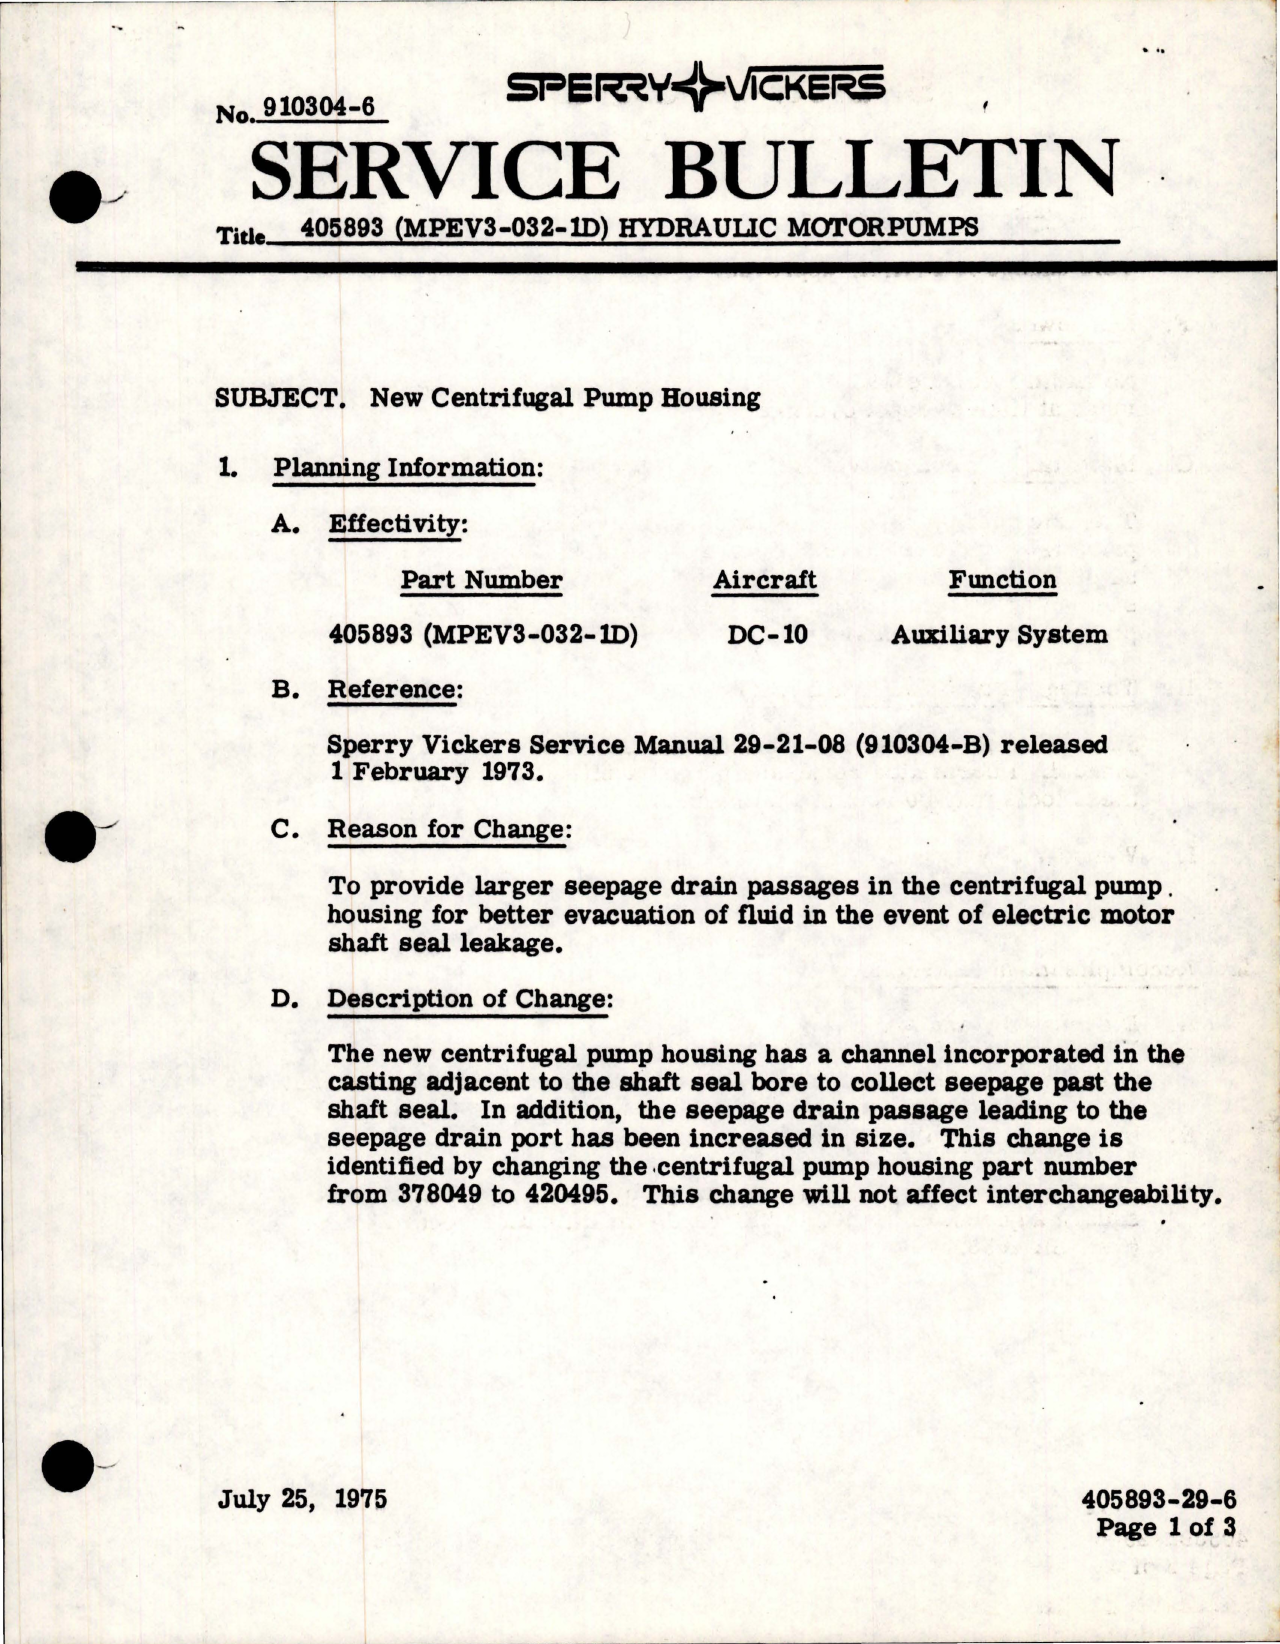 Sample page 1 from AirCorps Library document: Hydraulic Motorpumps - New Centrifugal Pump Housing - Part 405893 - Model MPEV3-032-1D